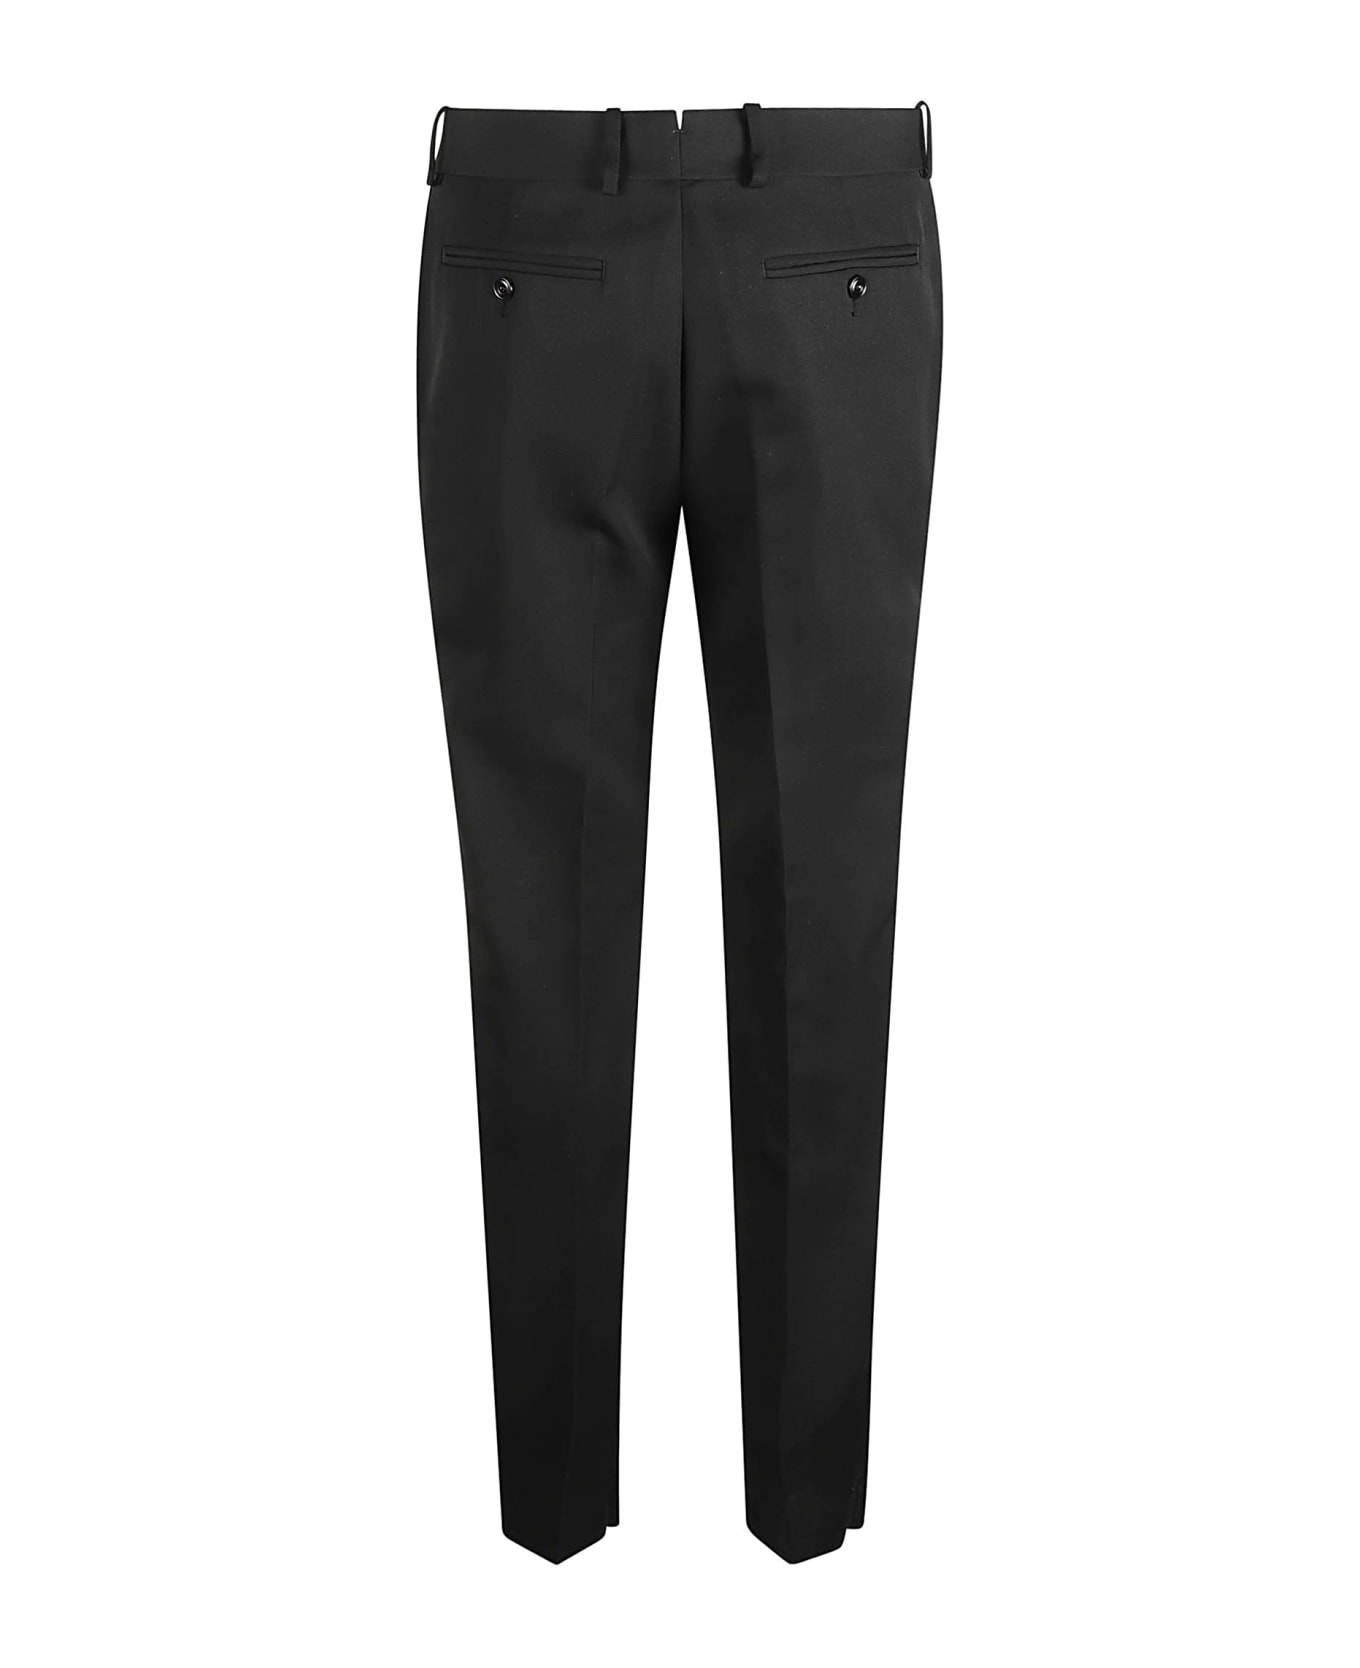 Alexander McQueen Classic Trousers - Black ボトムス